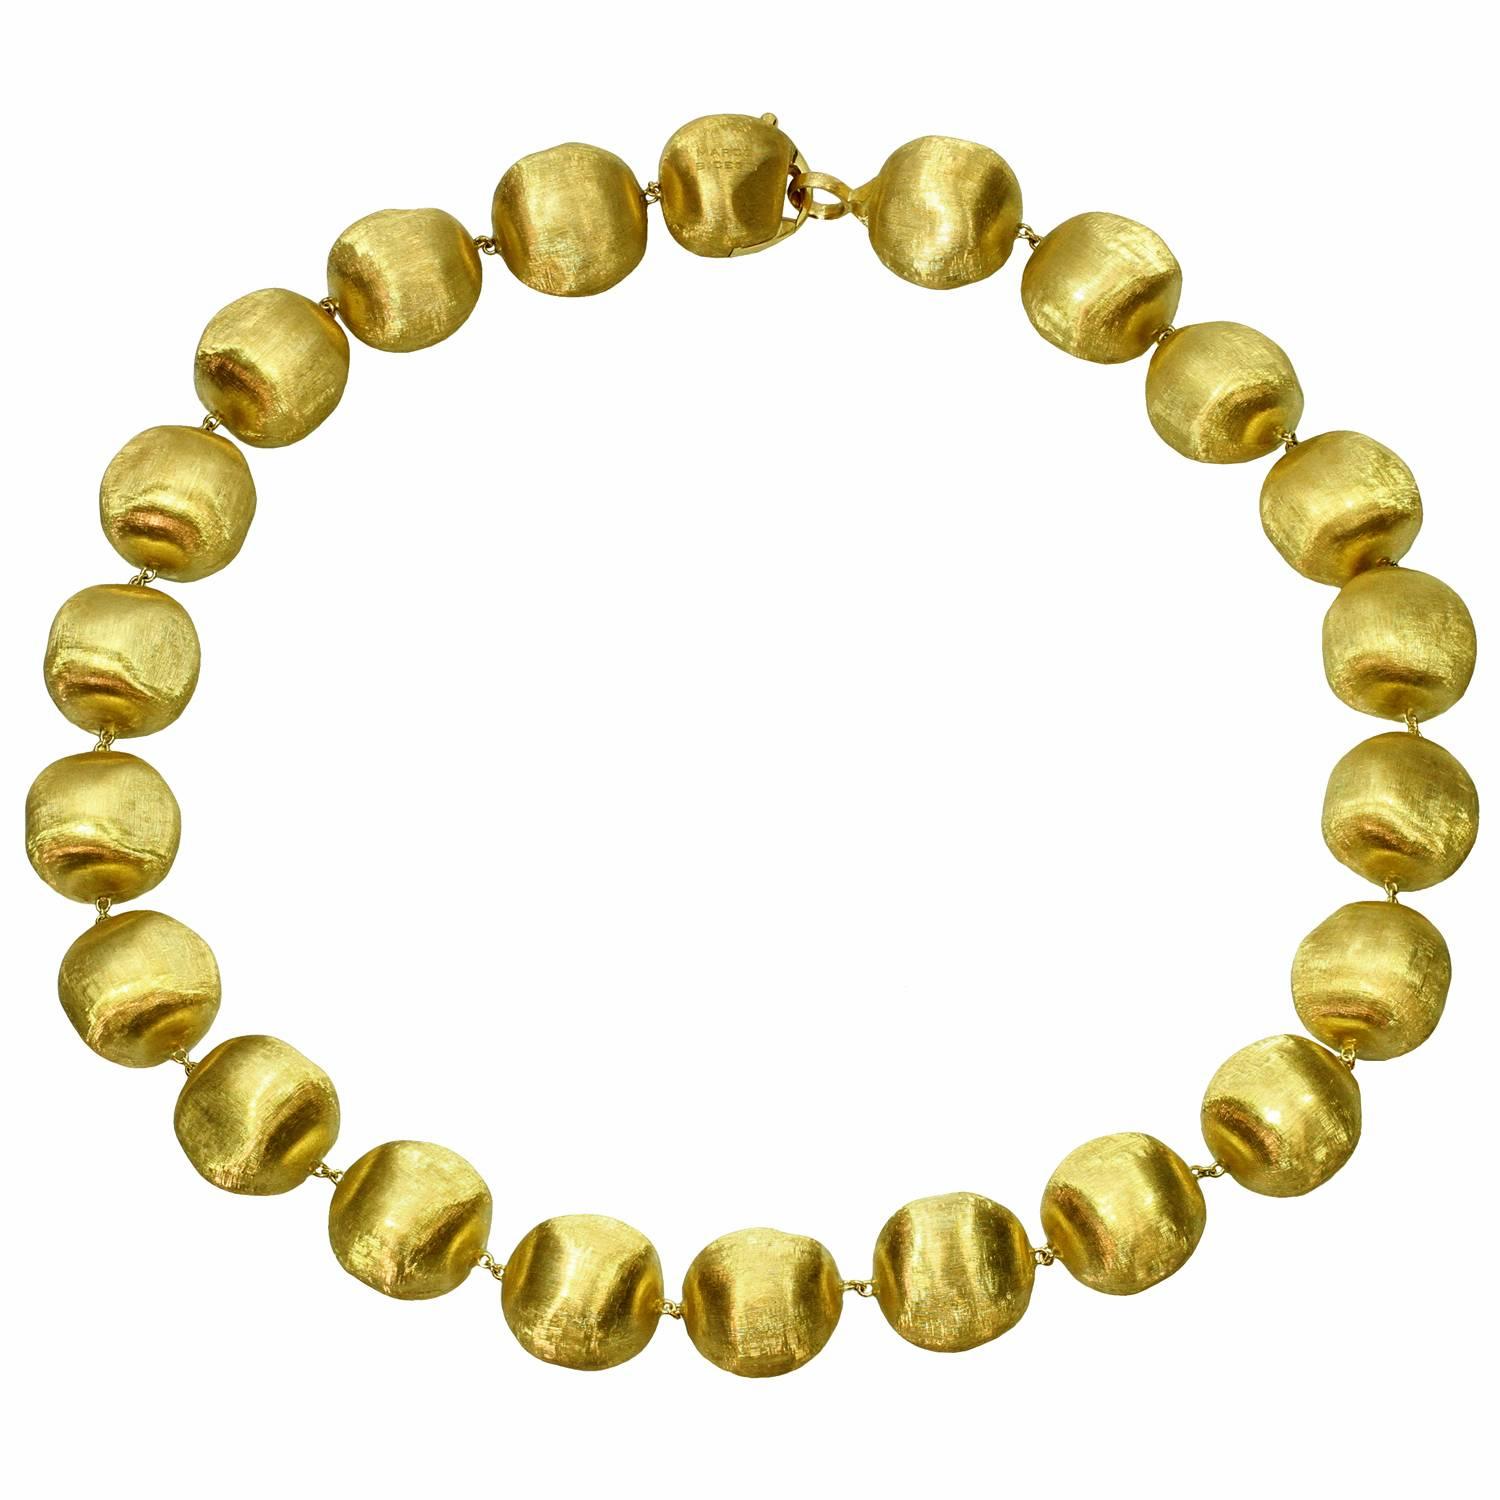 MarCo Bicego Africa Yellow Gold Large Bead Necklace